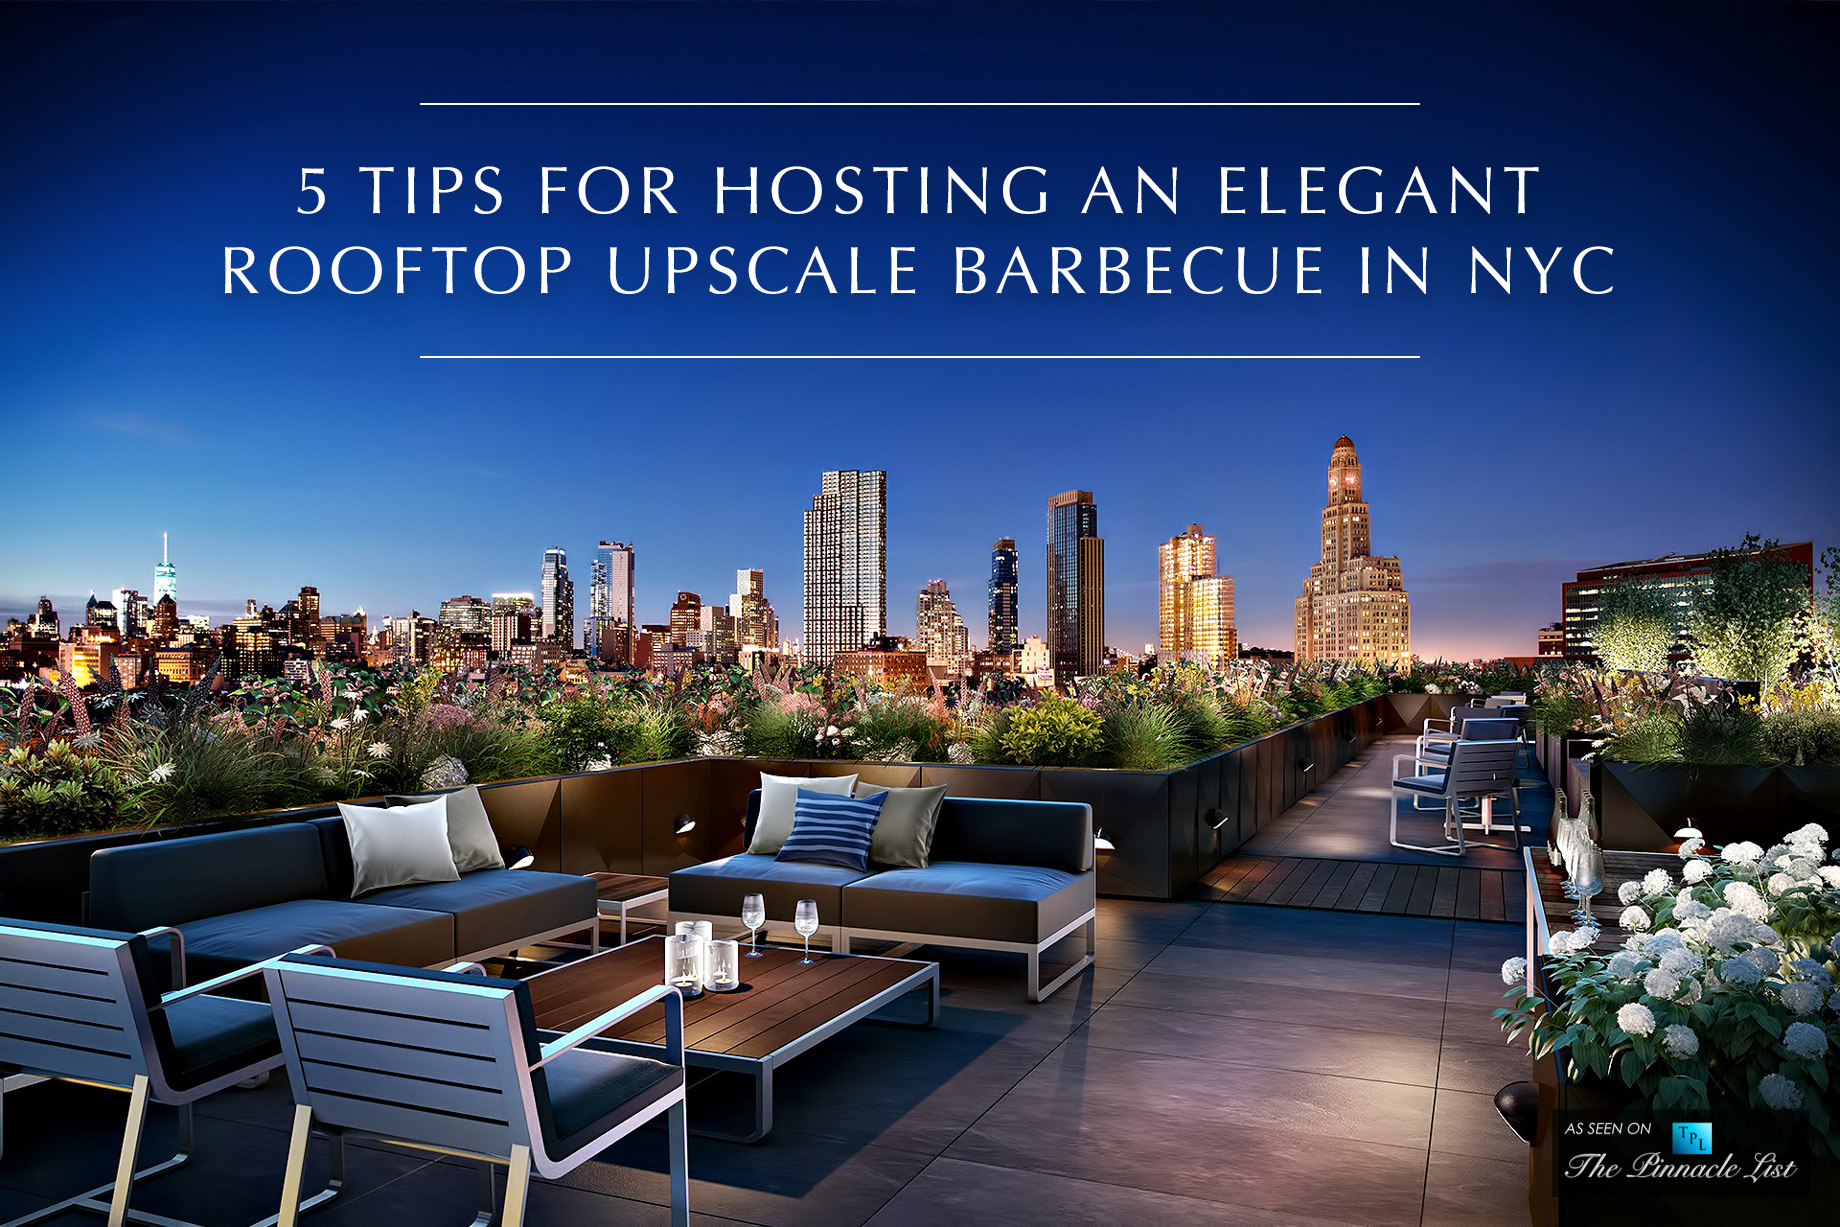 5 Tips for Hosting an Elegant Rooftop Upscale Barbecue in NYC